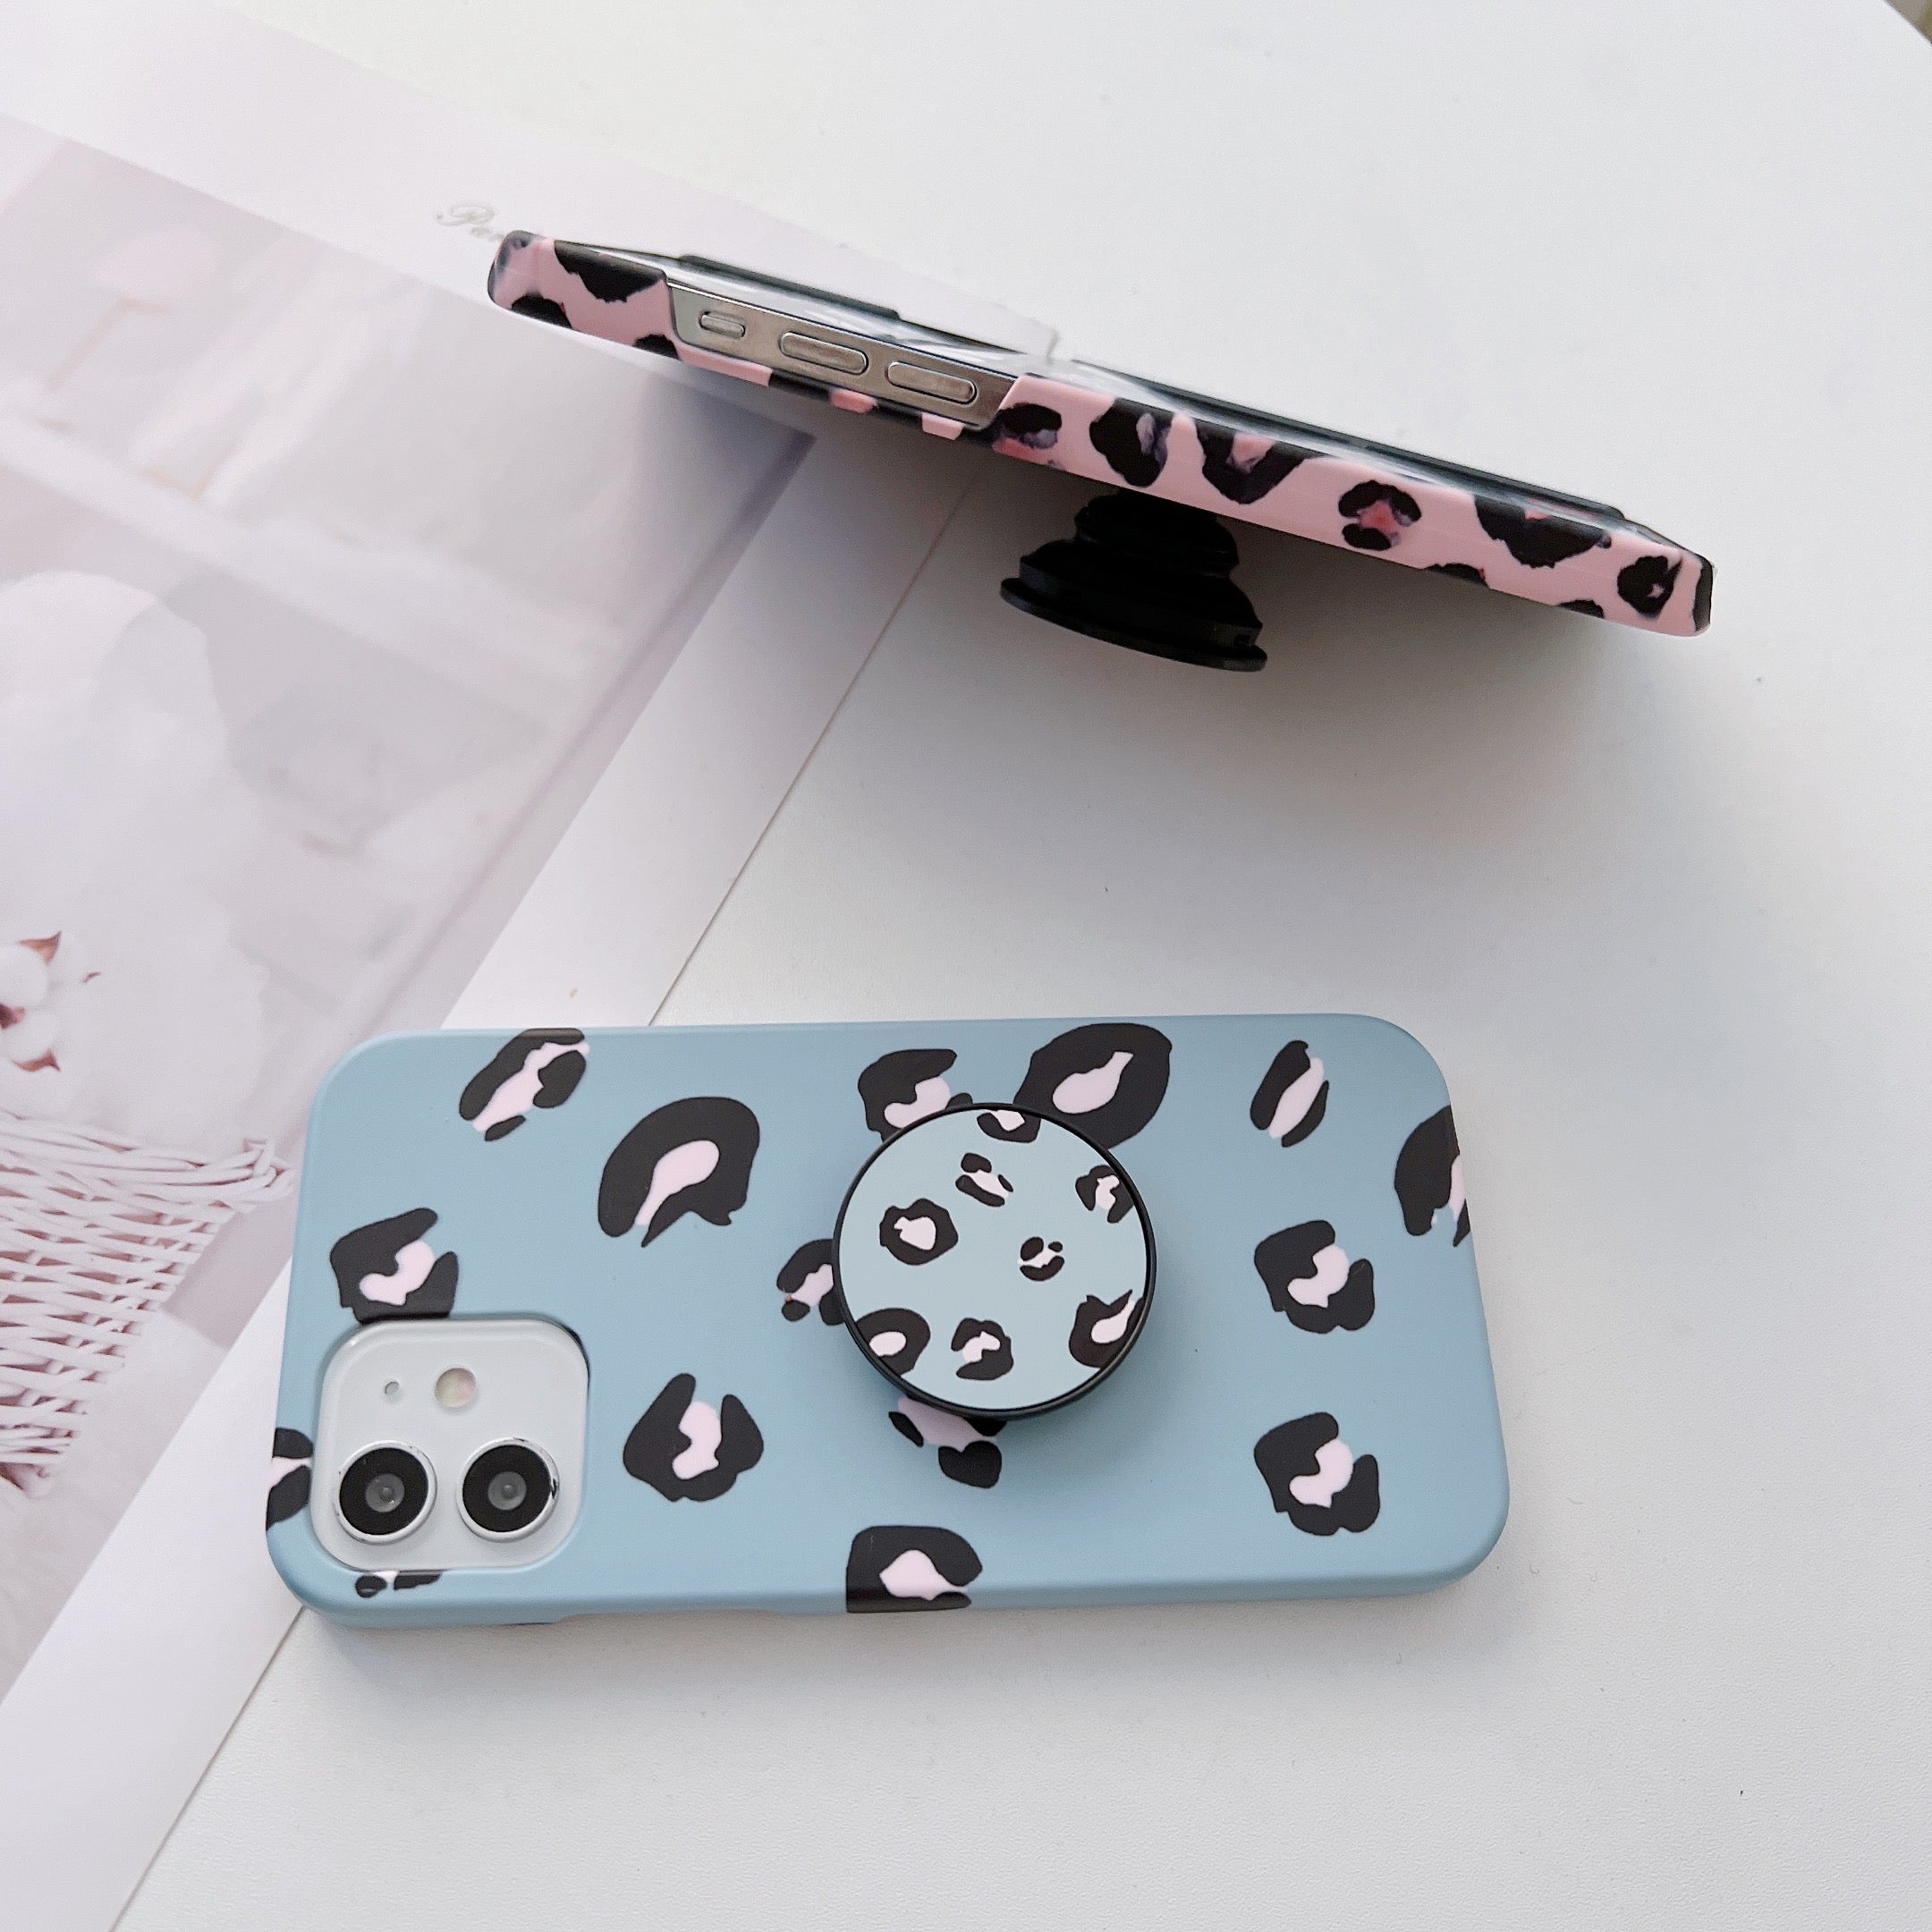 The Leopard Family Slim Case Cover With Holder - Kalakaar Indiaa